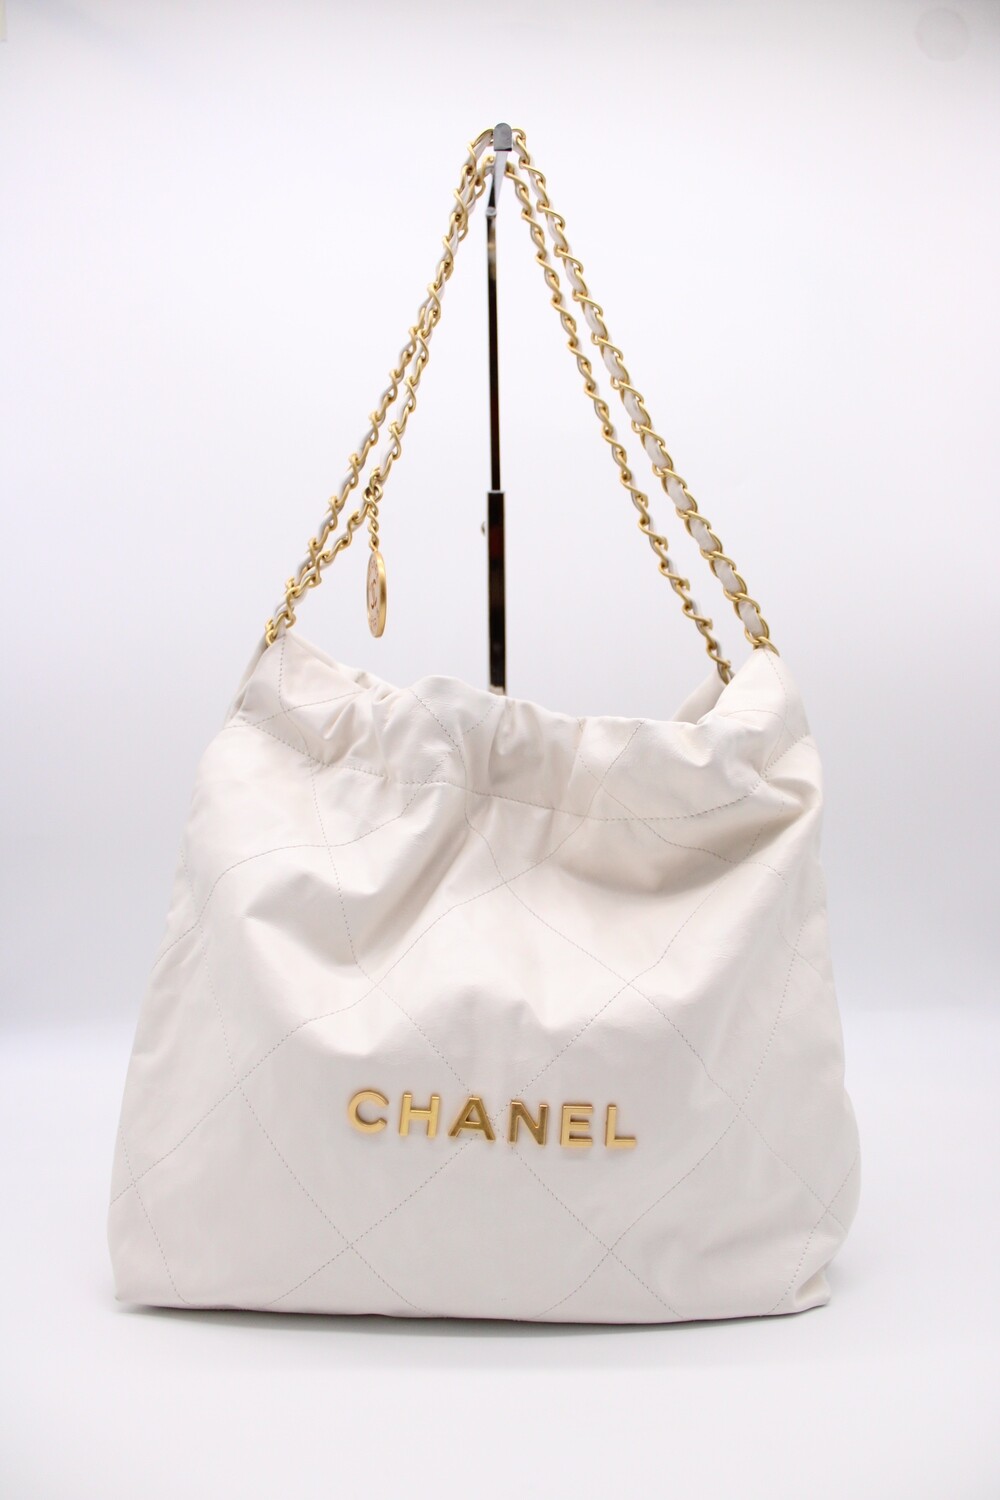 Chanel 22 Small, White Leather, Gold Hardware, Preowned No Dustbag